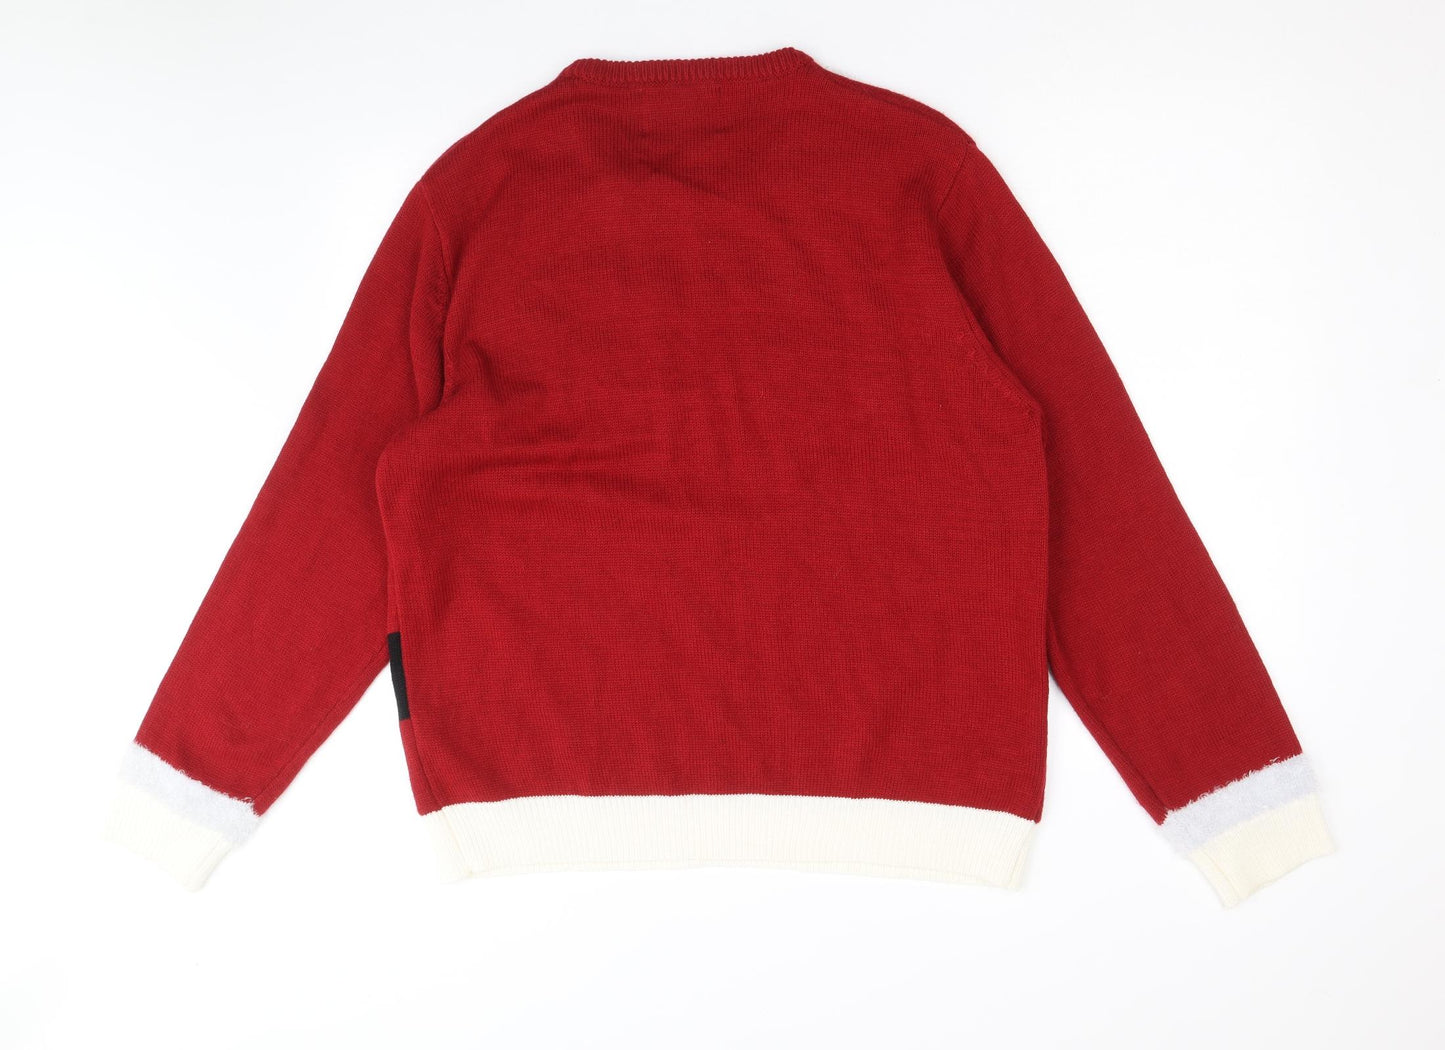 Cedar Wood State Mens Red Round Neck Acrylic Pullover Jumper Size 2XL Long Sleeve - Santa Jumper